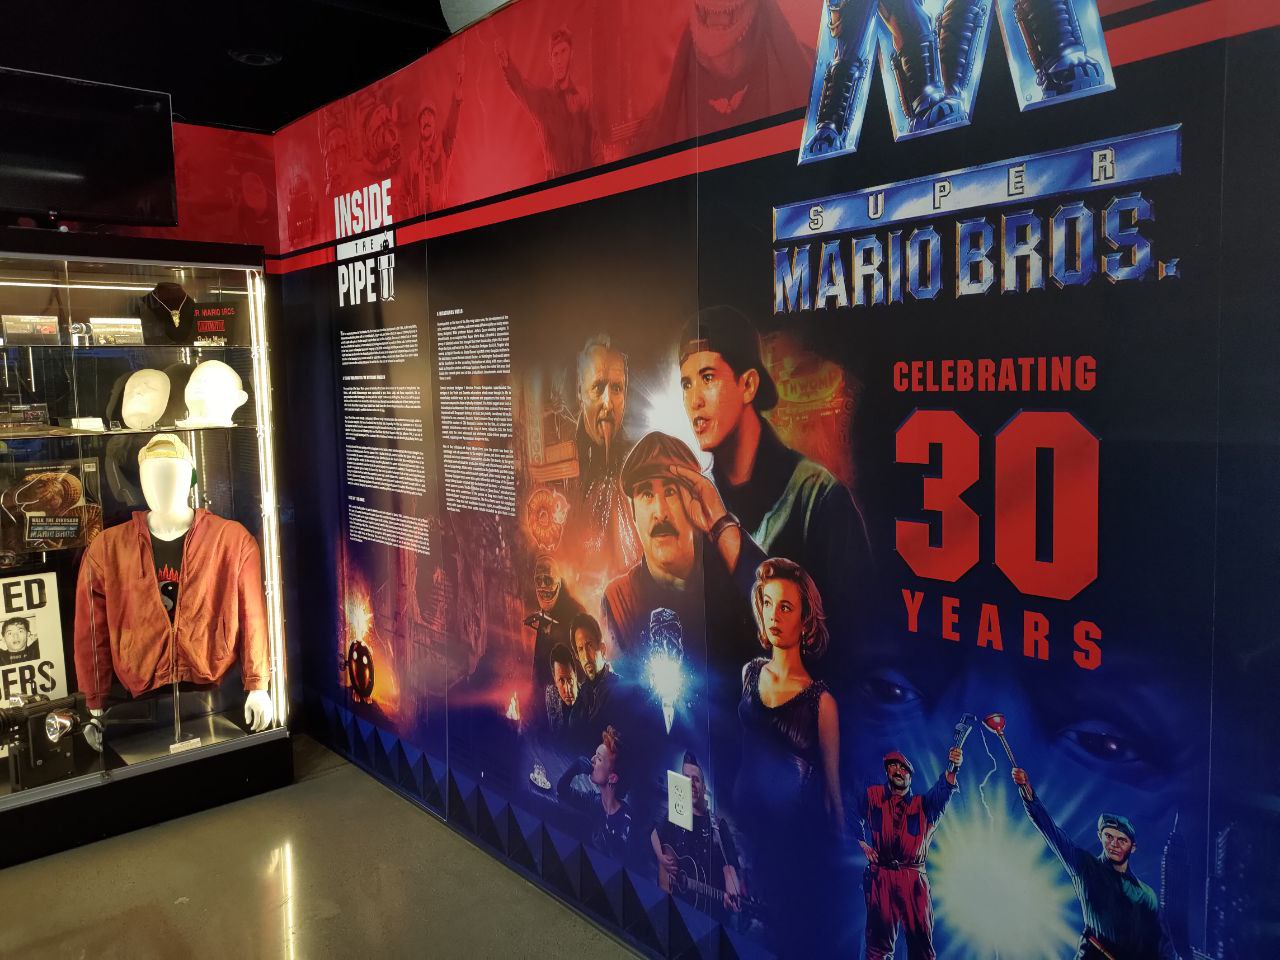 The National Videogame Museum's display on the 30th anniversary of the Super Mario Bros movie.